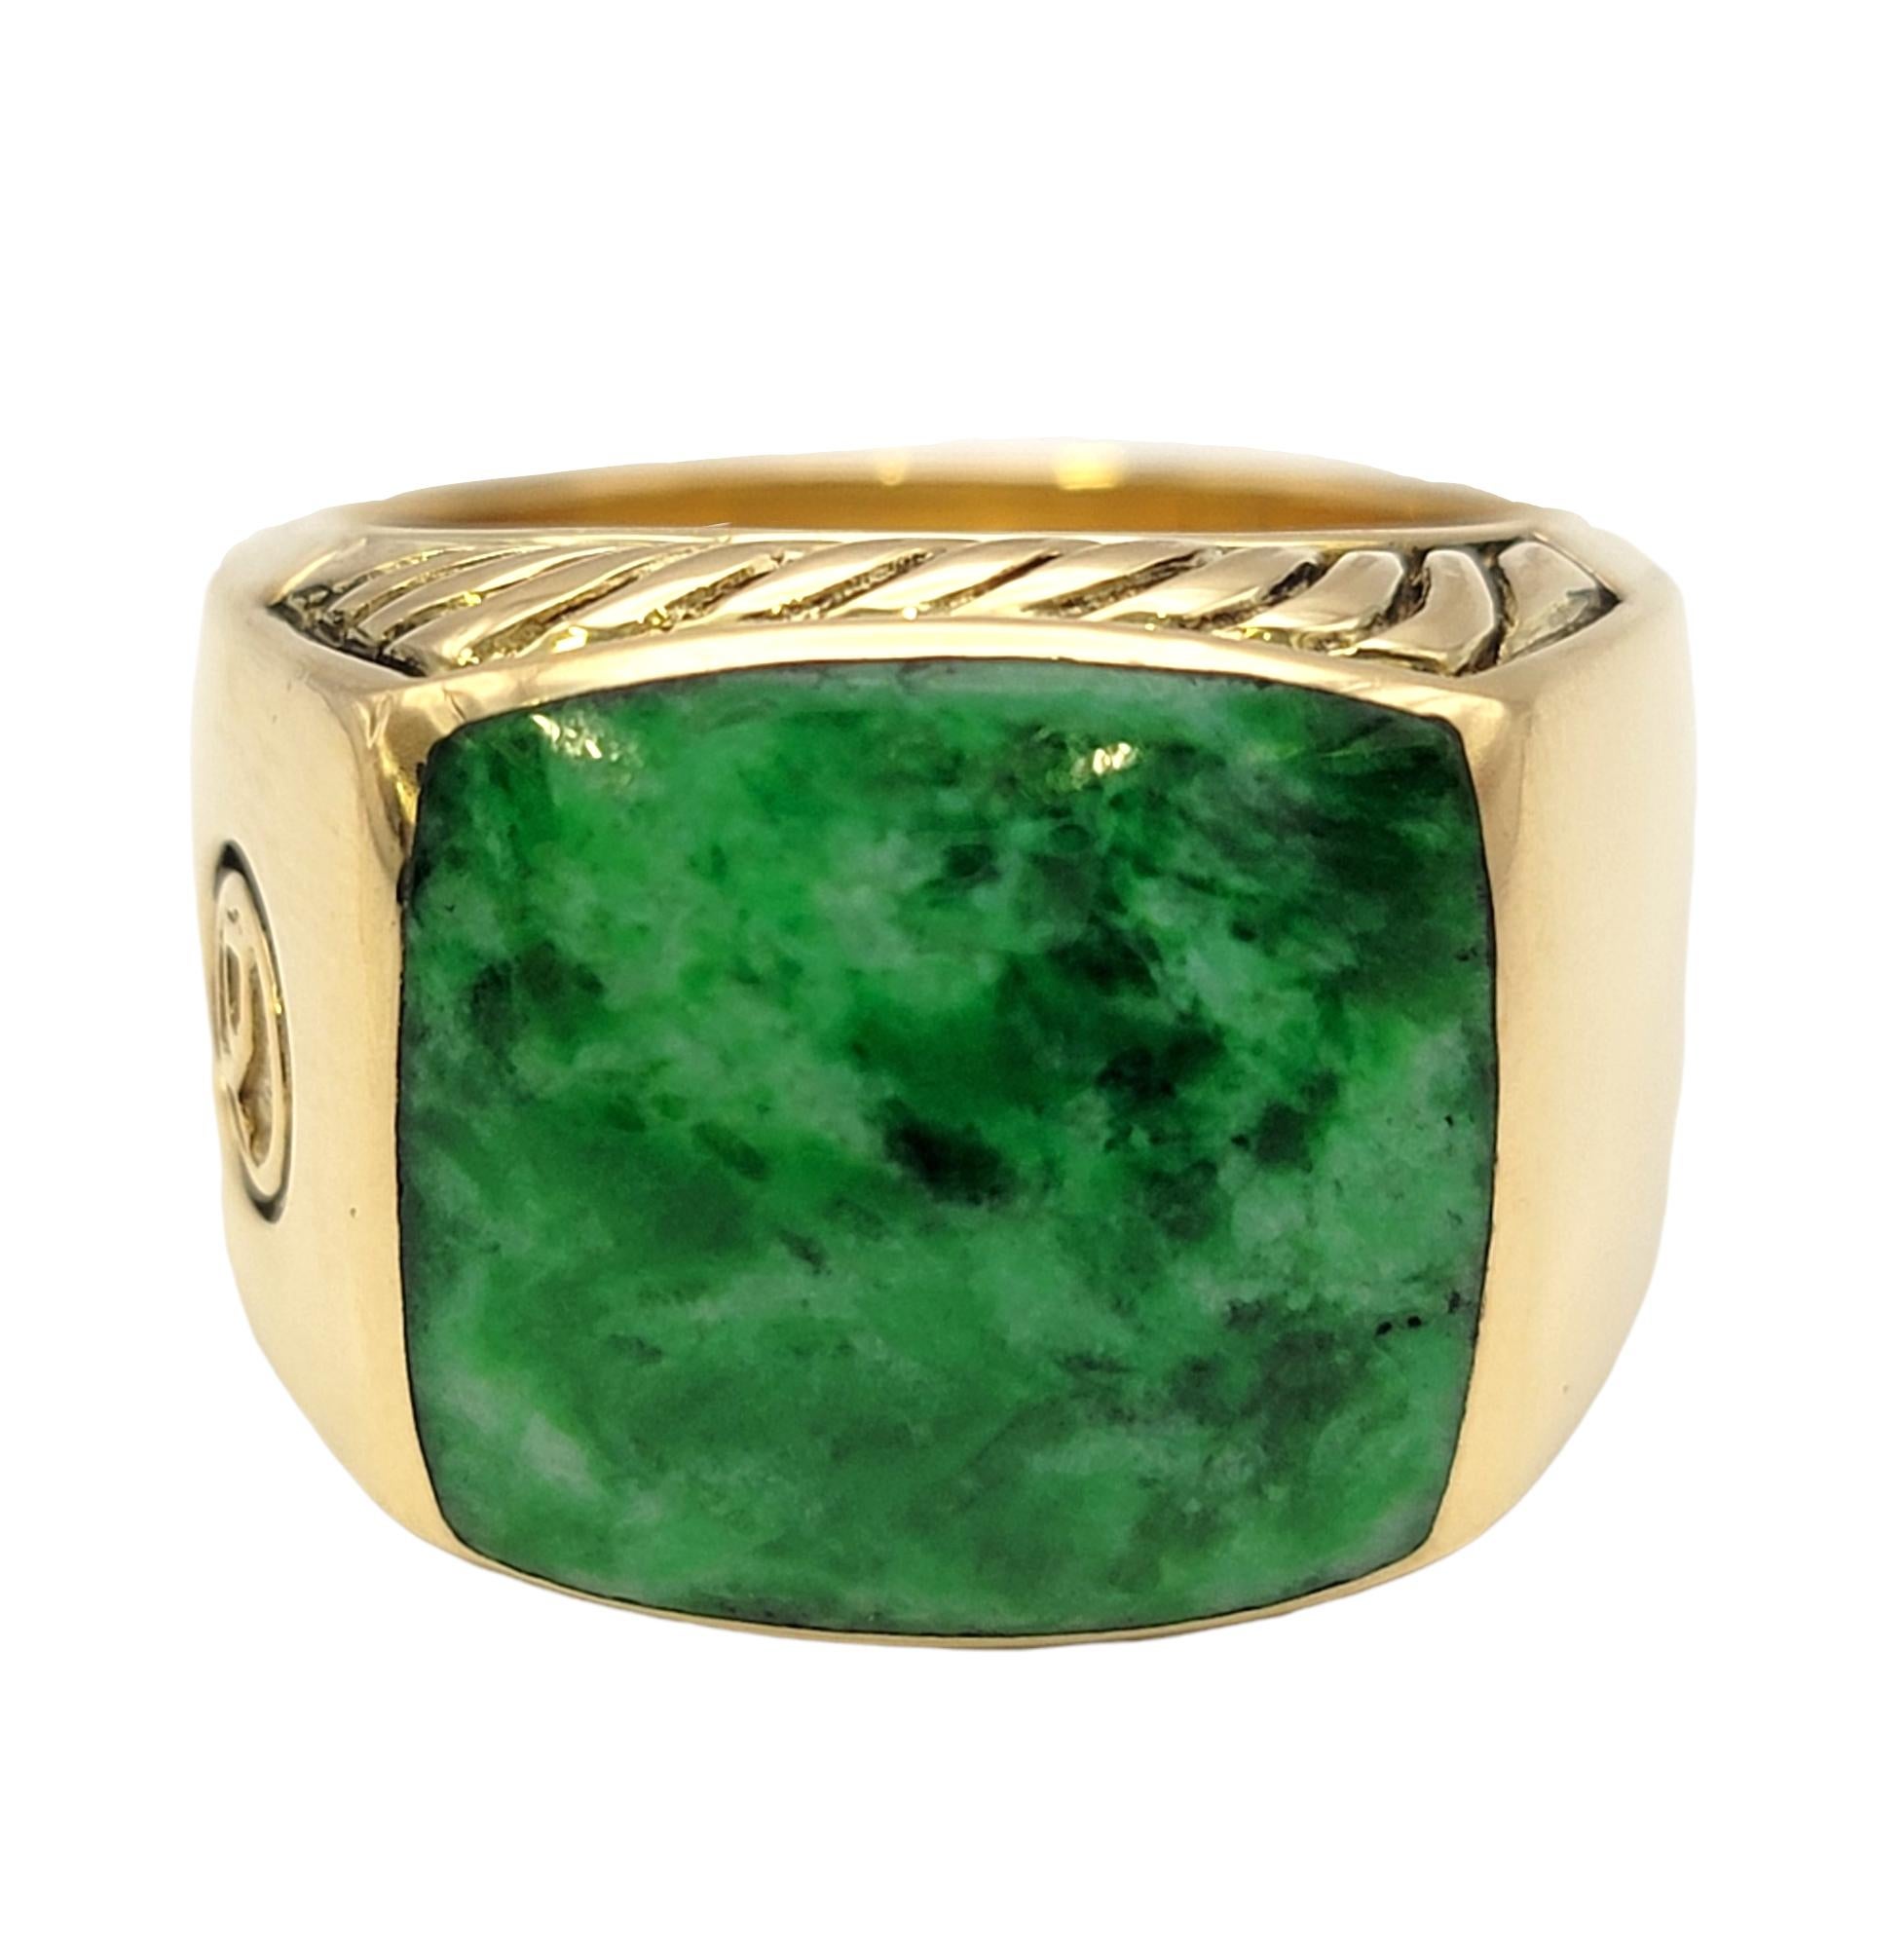 Ring size: 10

Bold, handsome 18 karat yellow gold and Jadeite ring by David Yurman is substantial in both size and color. The incredible Moss-in-Snow green color of the natural stone is remarkable and really draws the viewers attention to the